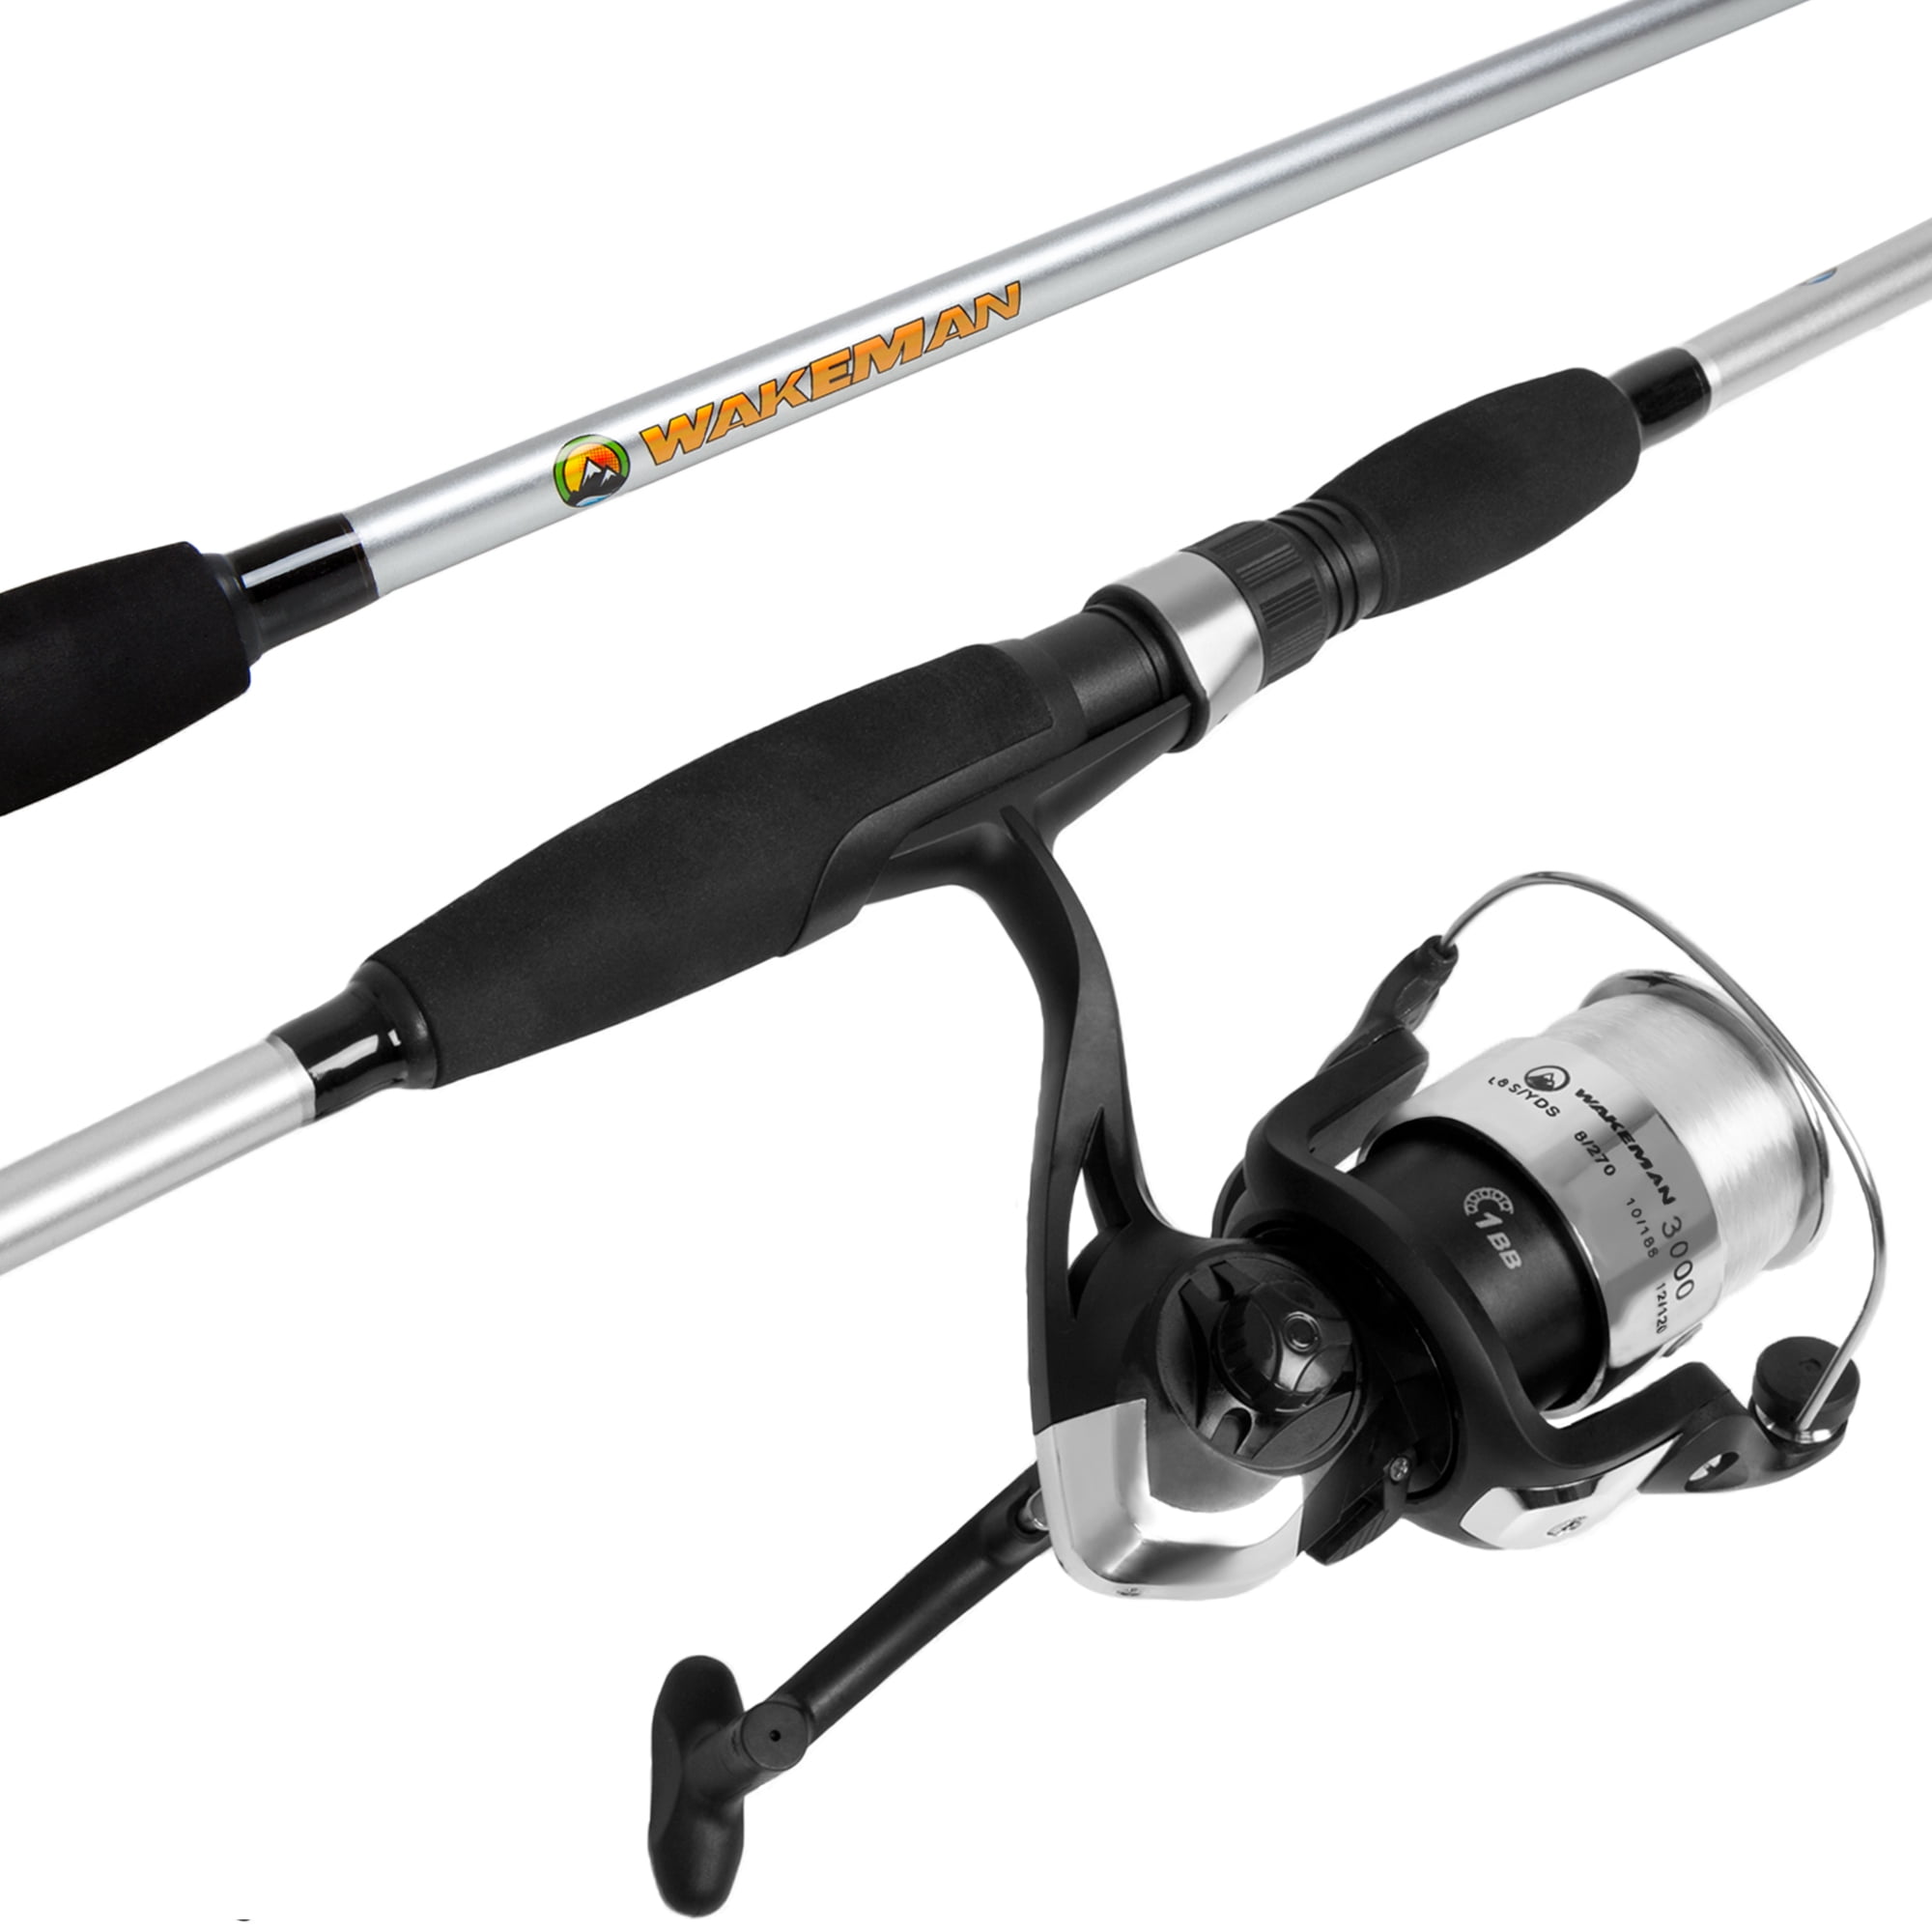 Strike Series Spinning Fishing Rod and Reel Combo - Fishing Pole by Wakeman, Silver